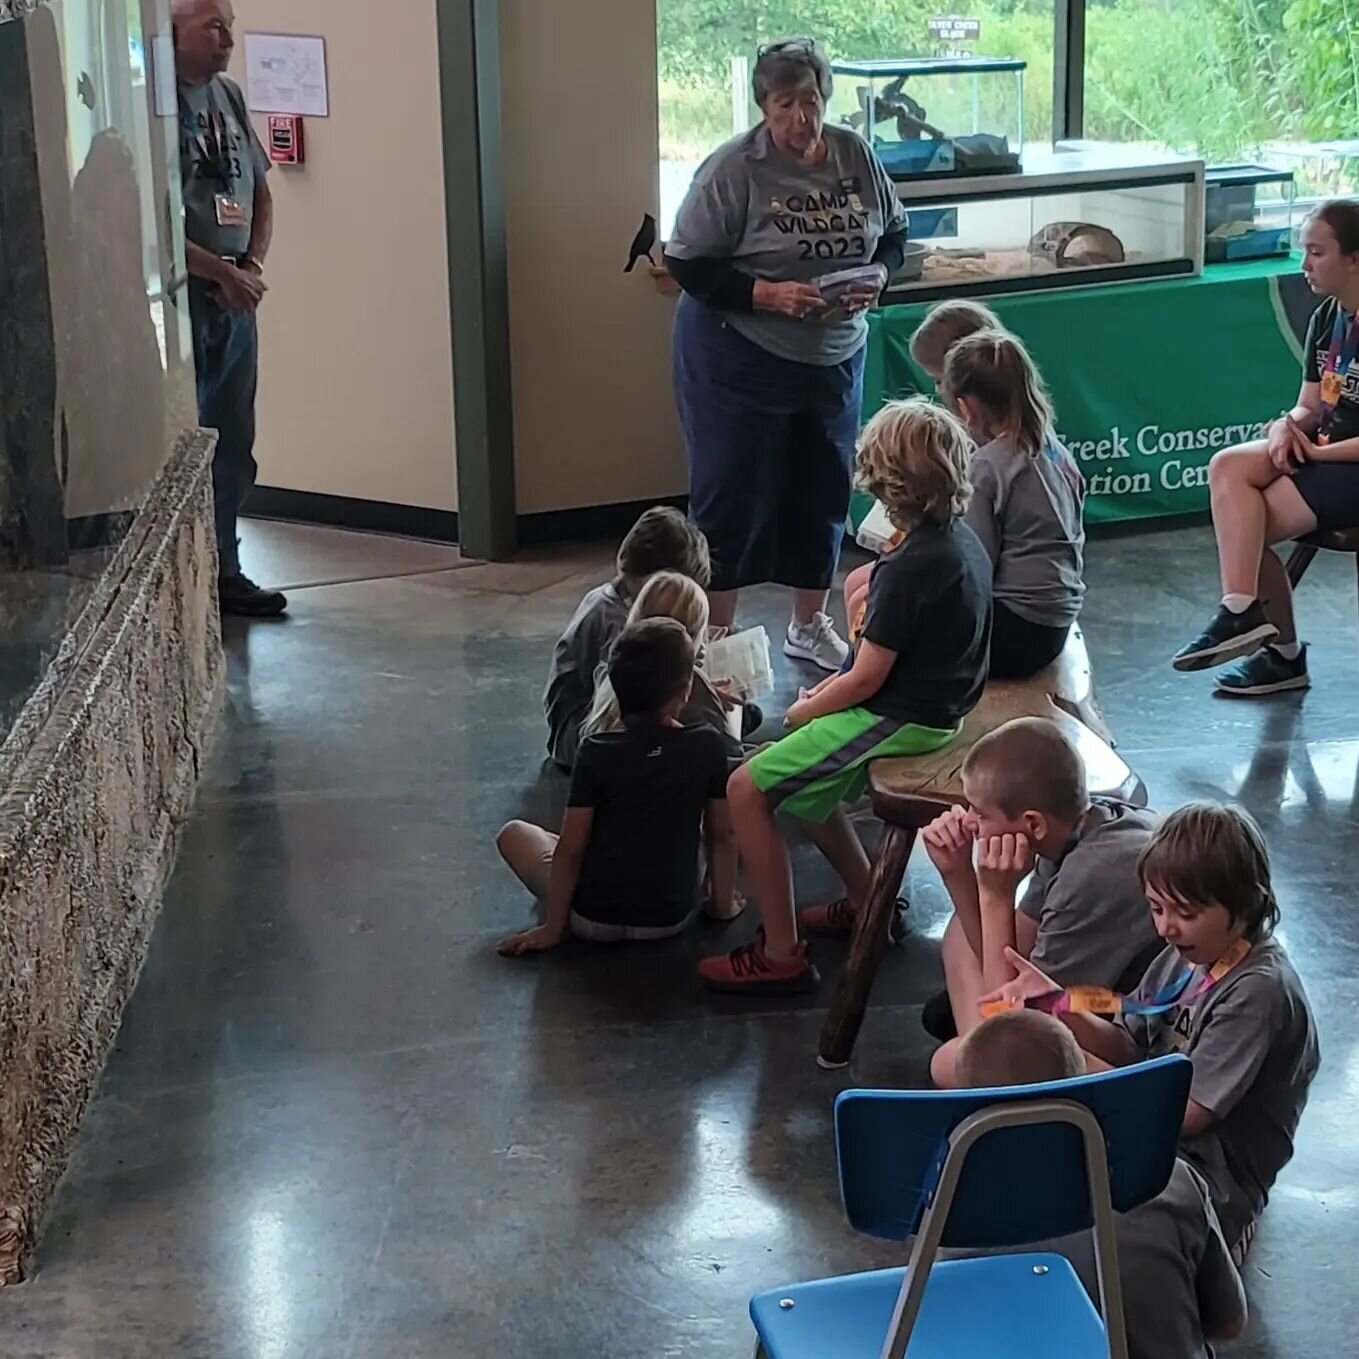 Master Naturalist Nancy shared info about Missouri fish at Shoal Creek Conservation Education Center with Camp WIldcat kids today.